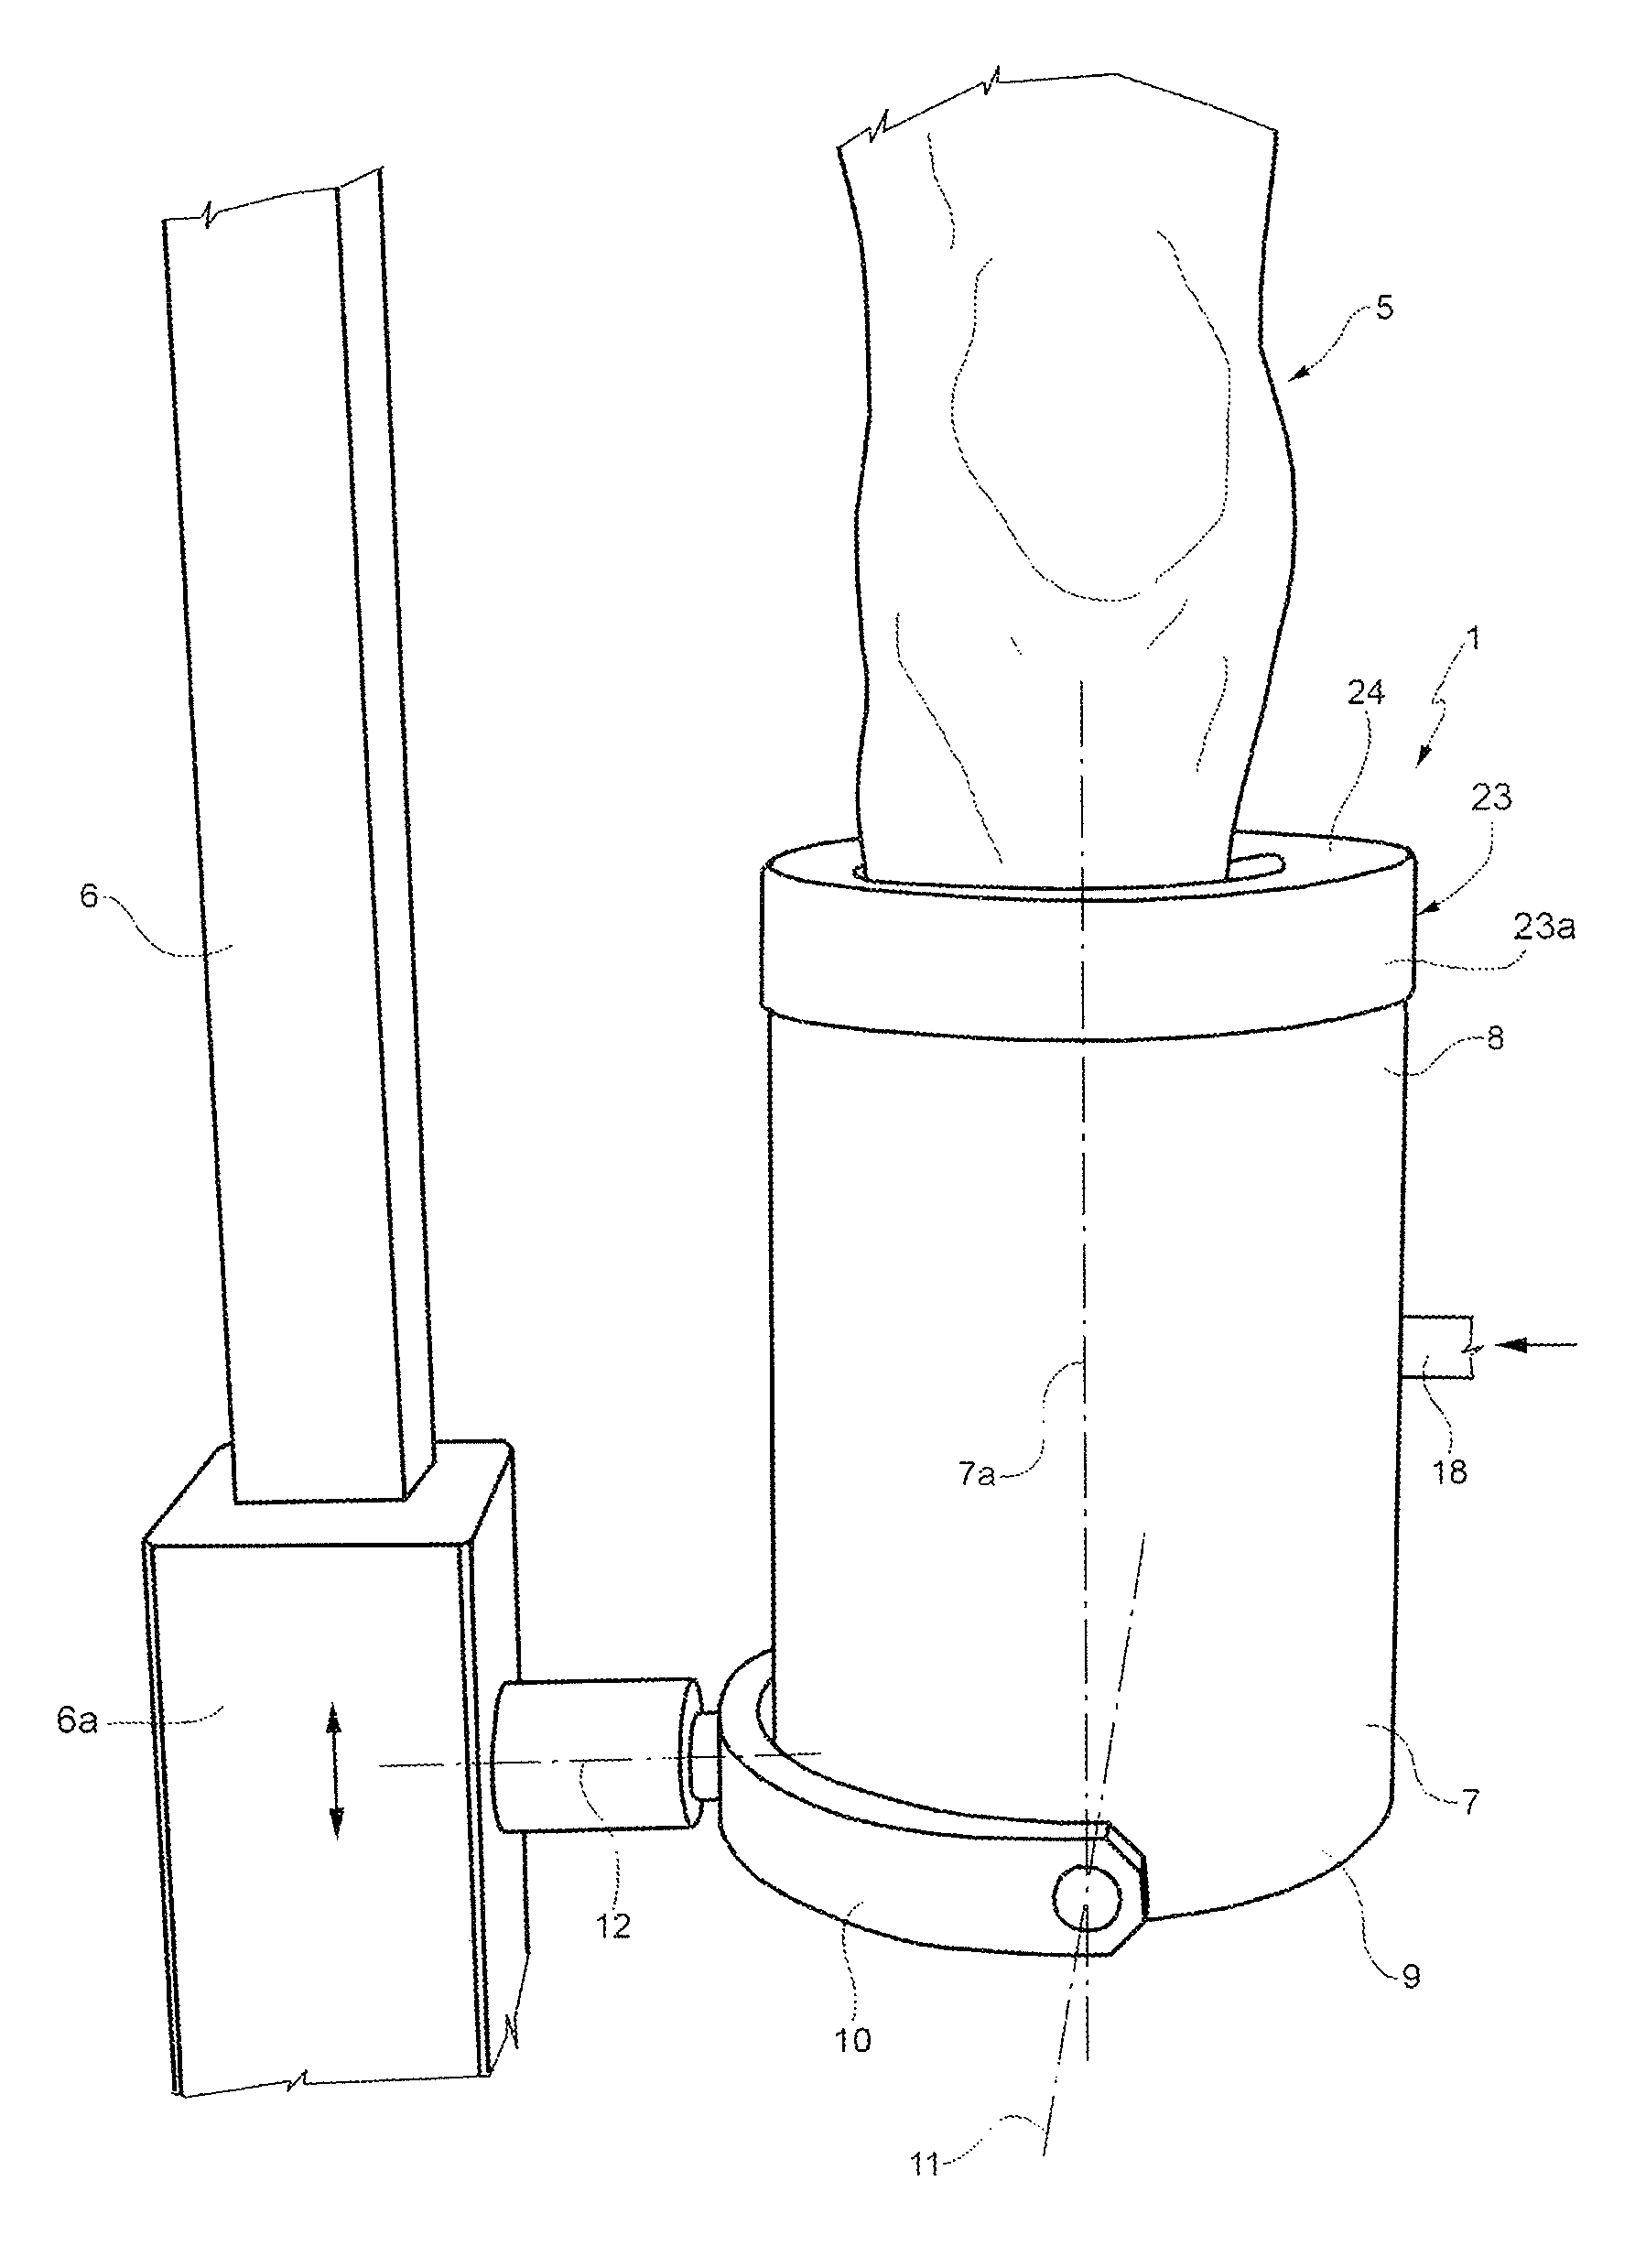 Machine for forming a cast of an end portion of an amputated limb